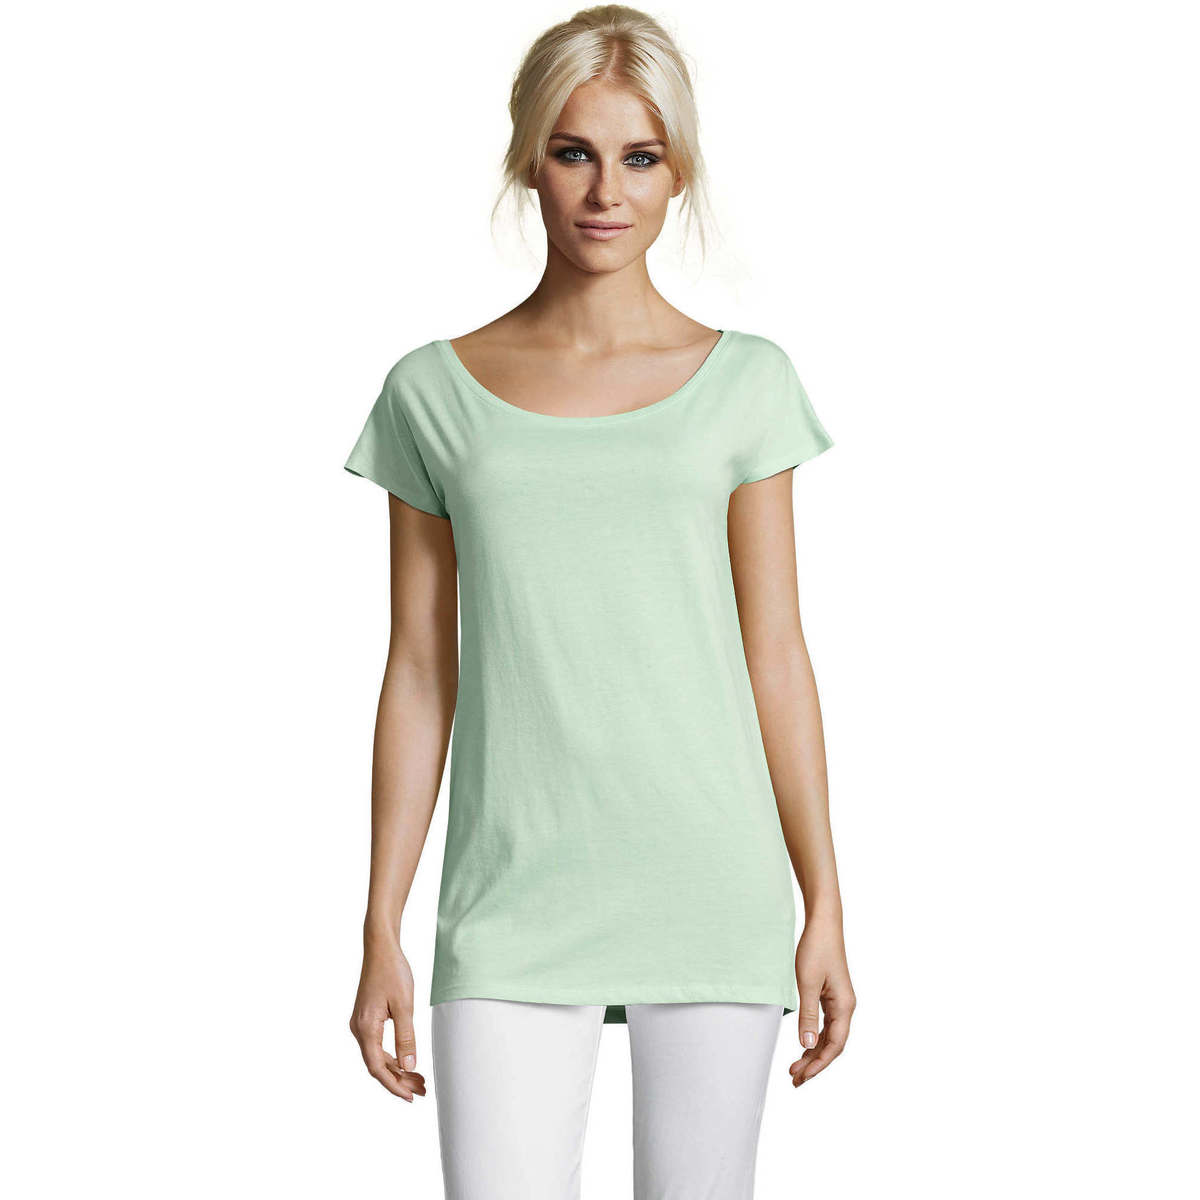 Textil Mulher T-shirt Manches Longues Col Rond Pur Coton Jecko MARYLIN STYLE KIMONO Verde